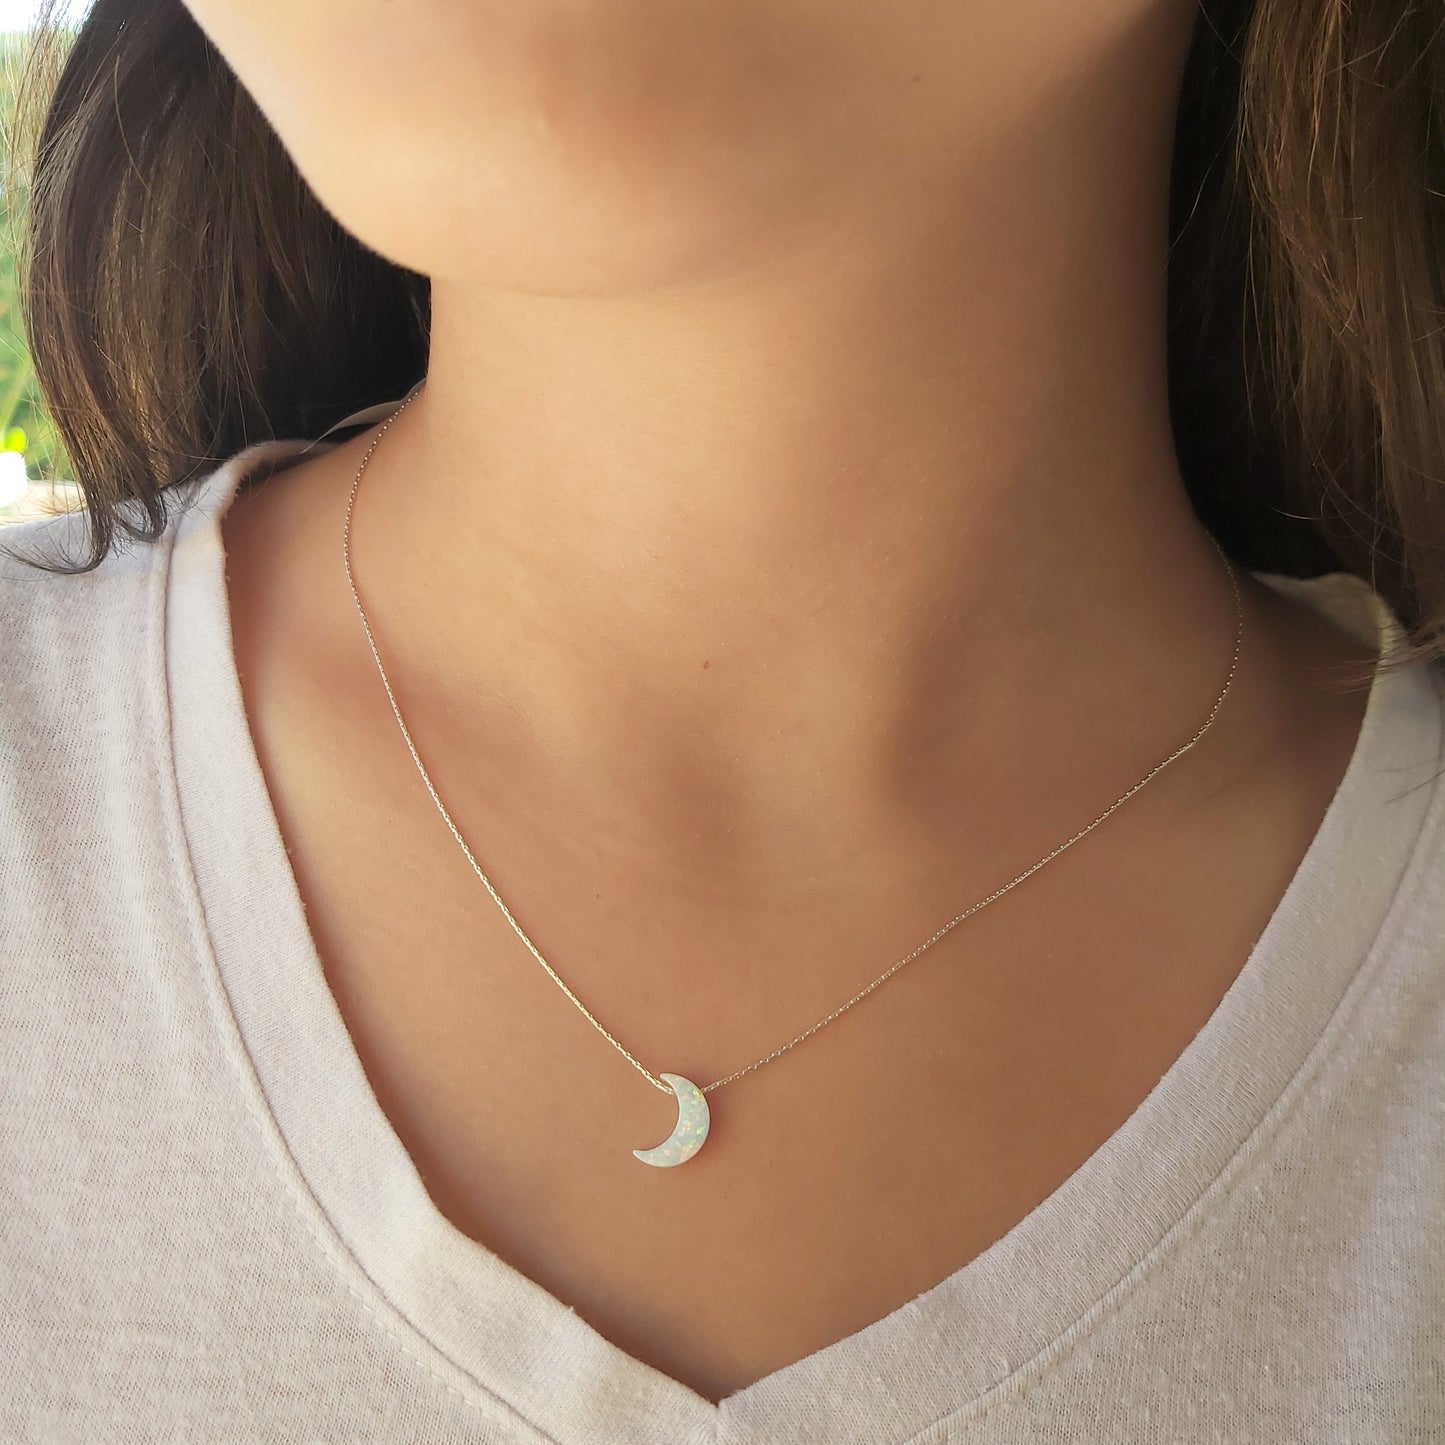 White Moon Opal Necklace Gold Filled 925 Sterling Silver Crescent Moon Pendant